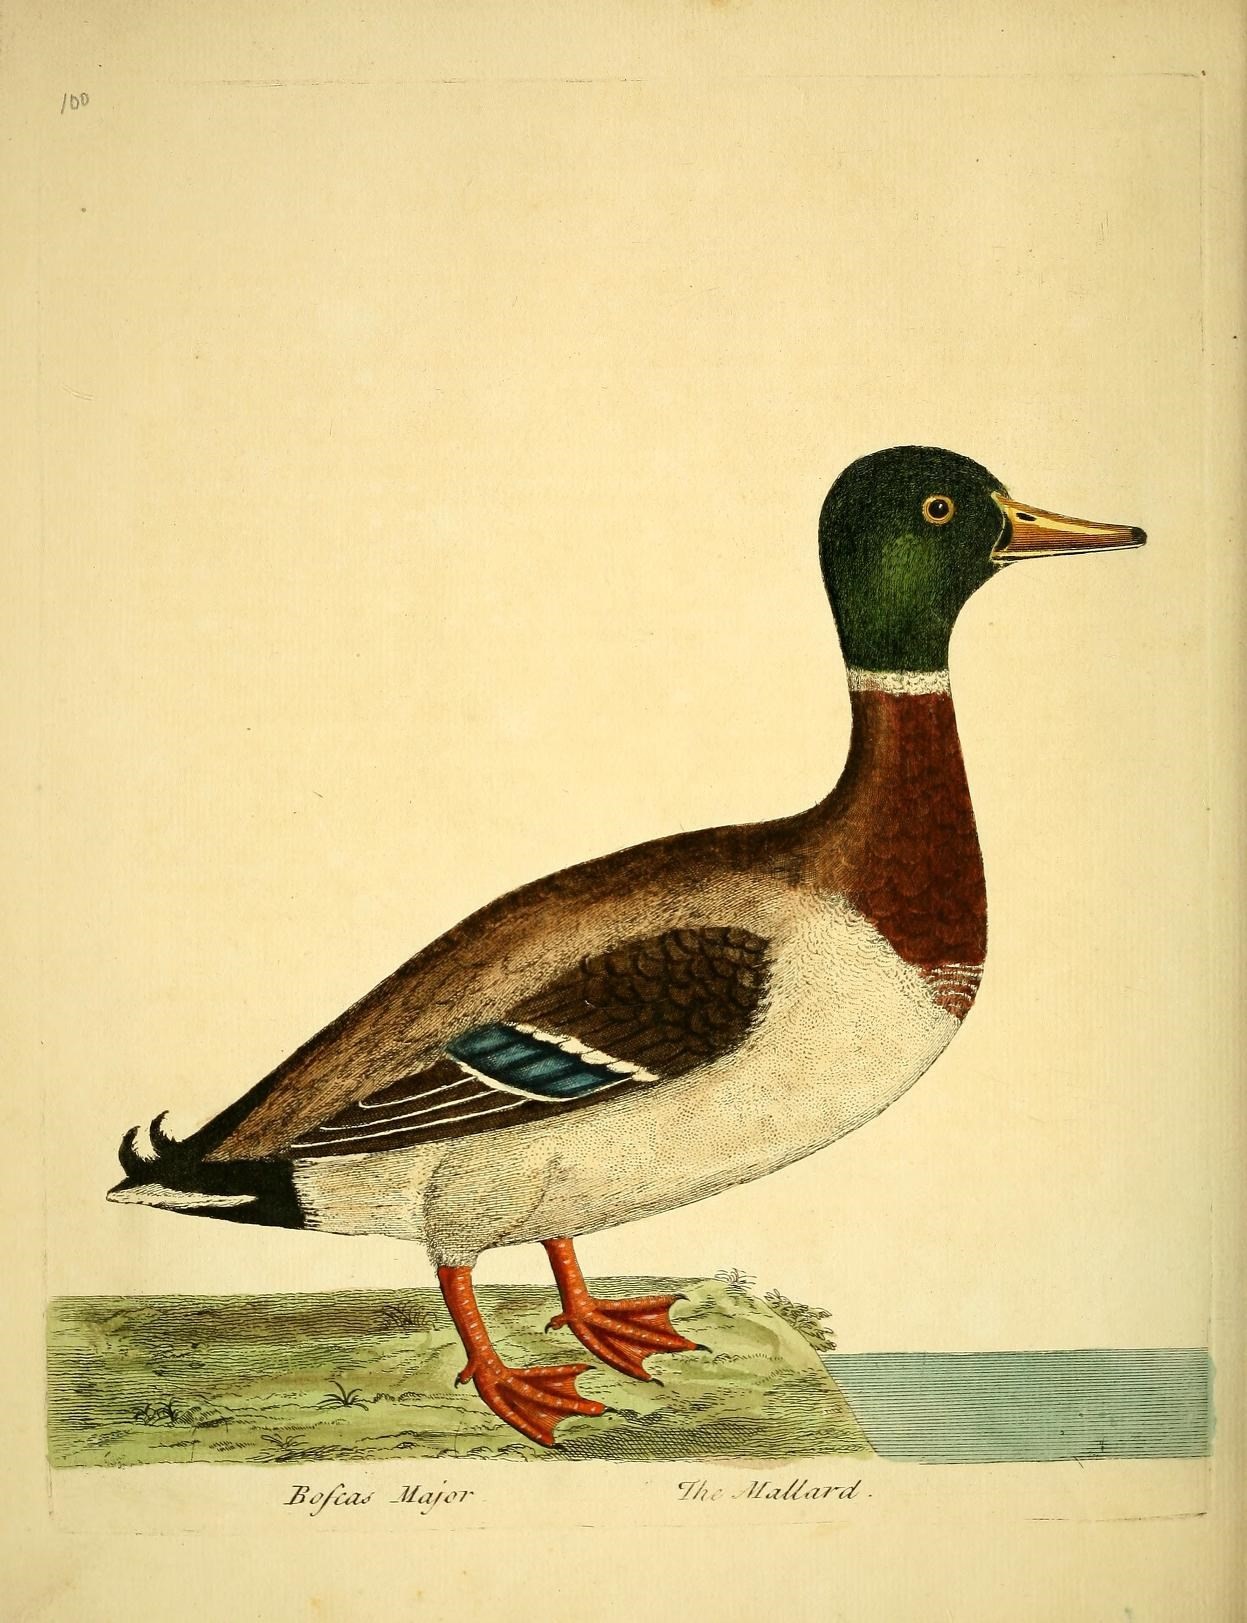 a painting of a duck with colored plumage and brown legs standing on some water